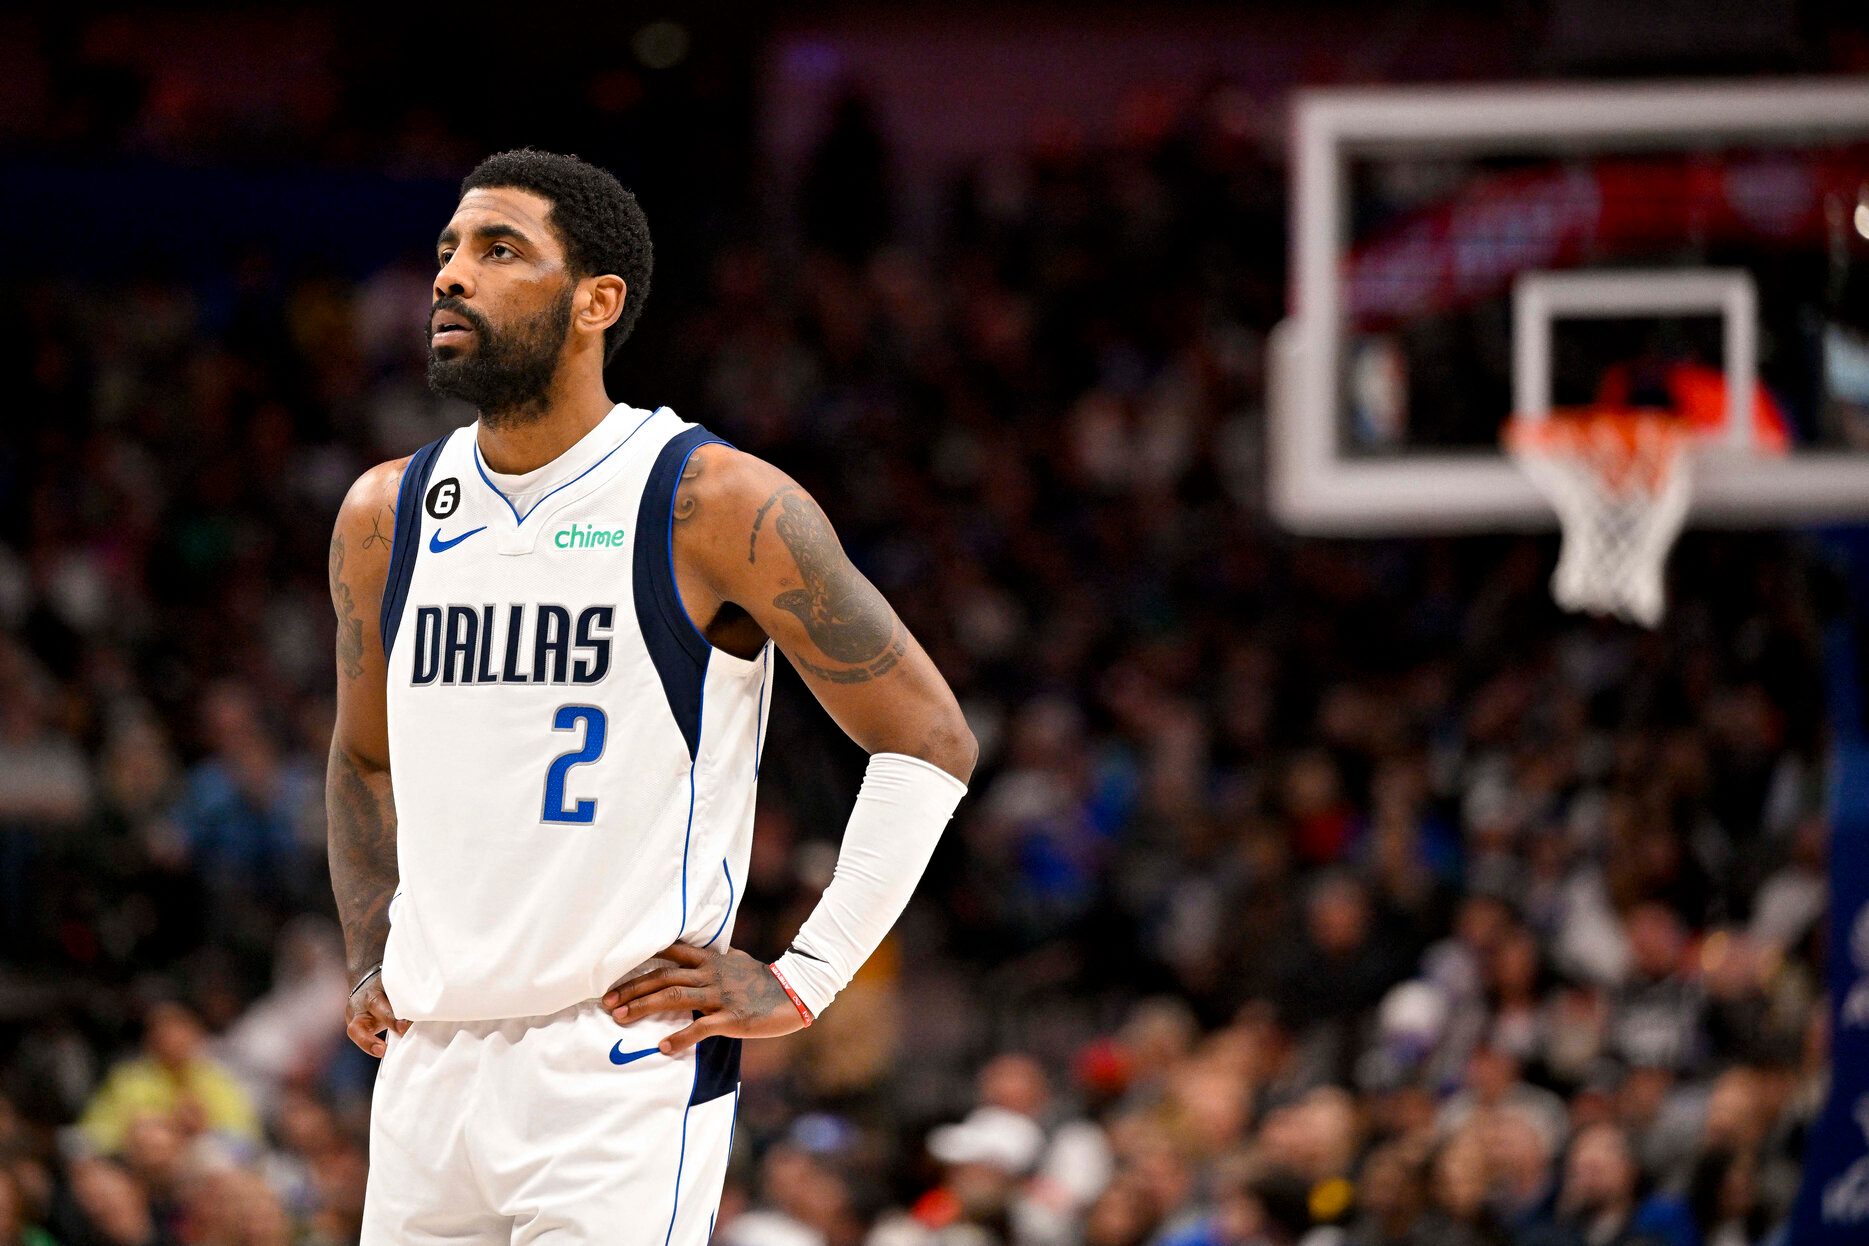 Kyrie Irving sticks with Dallas, to sign $126-million deal